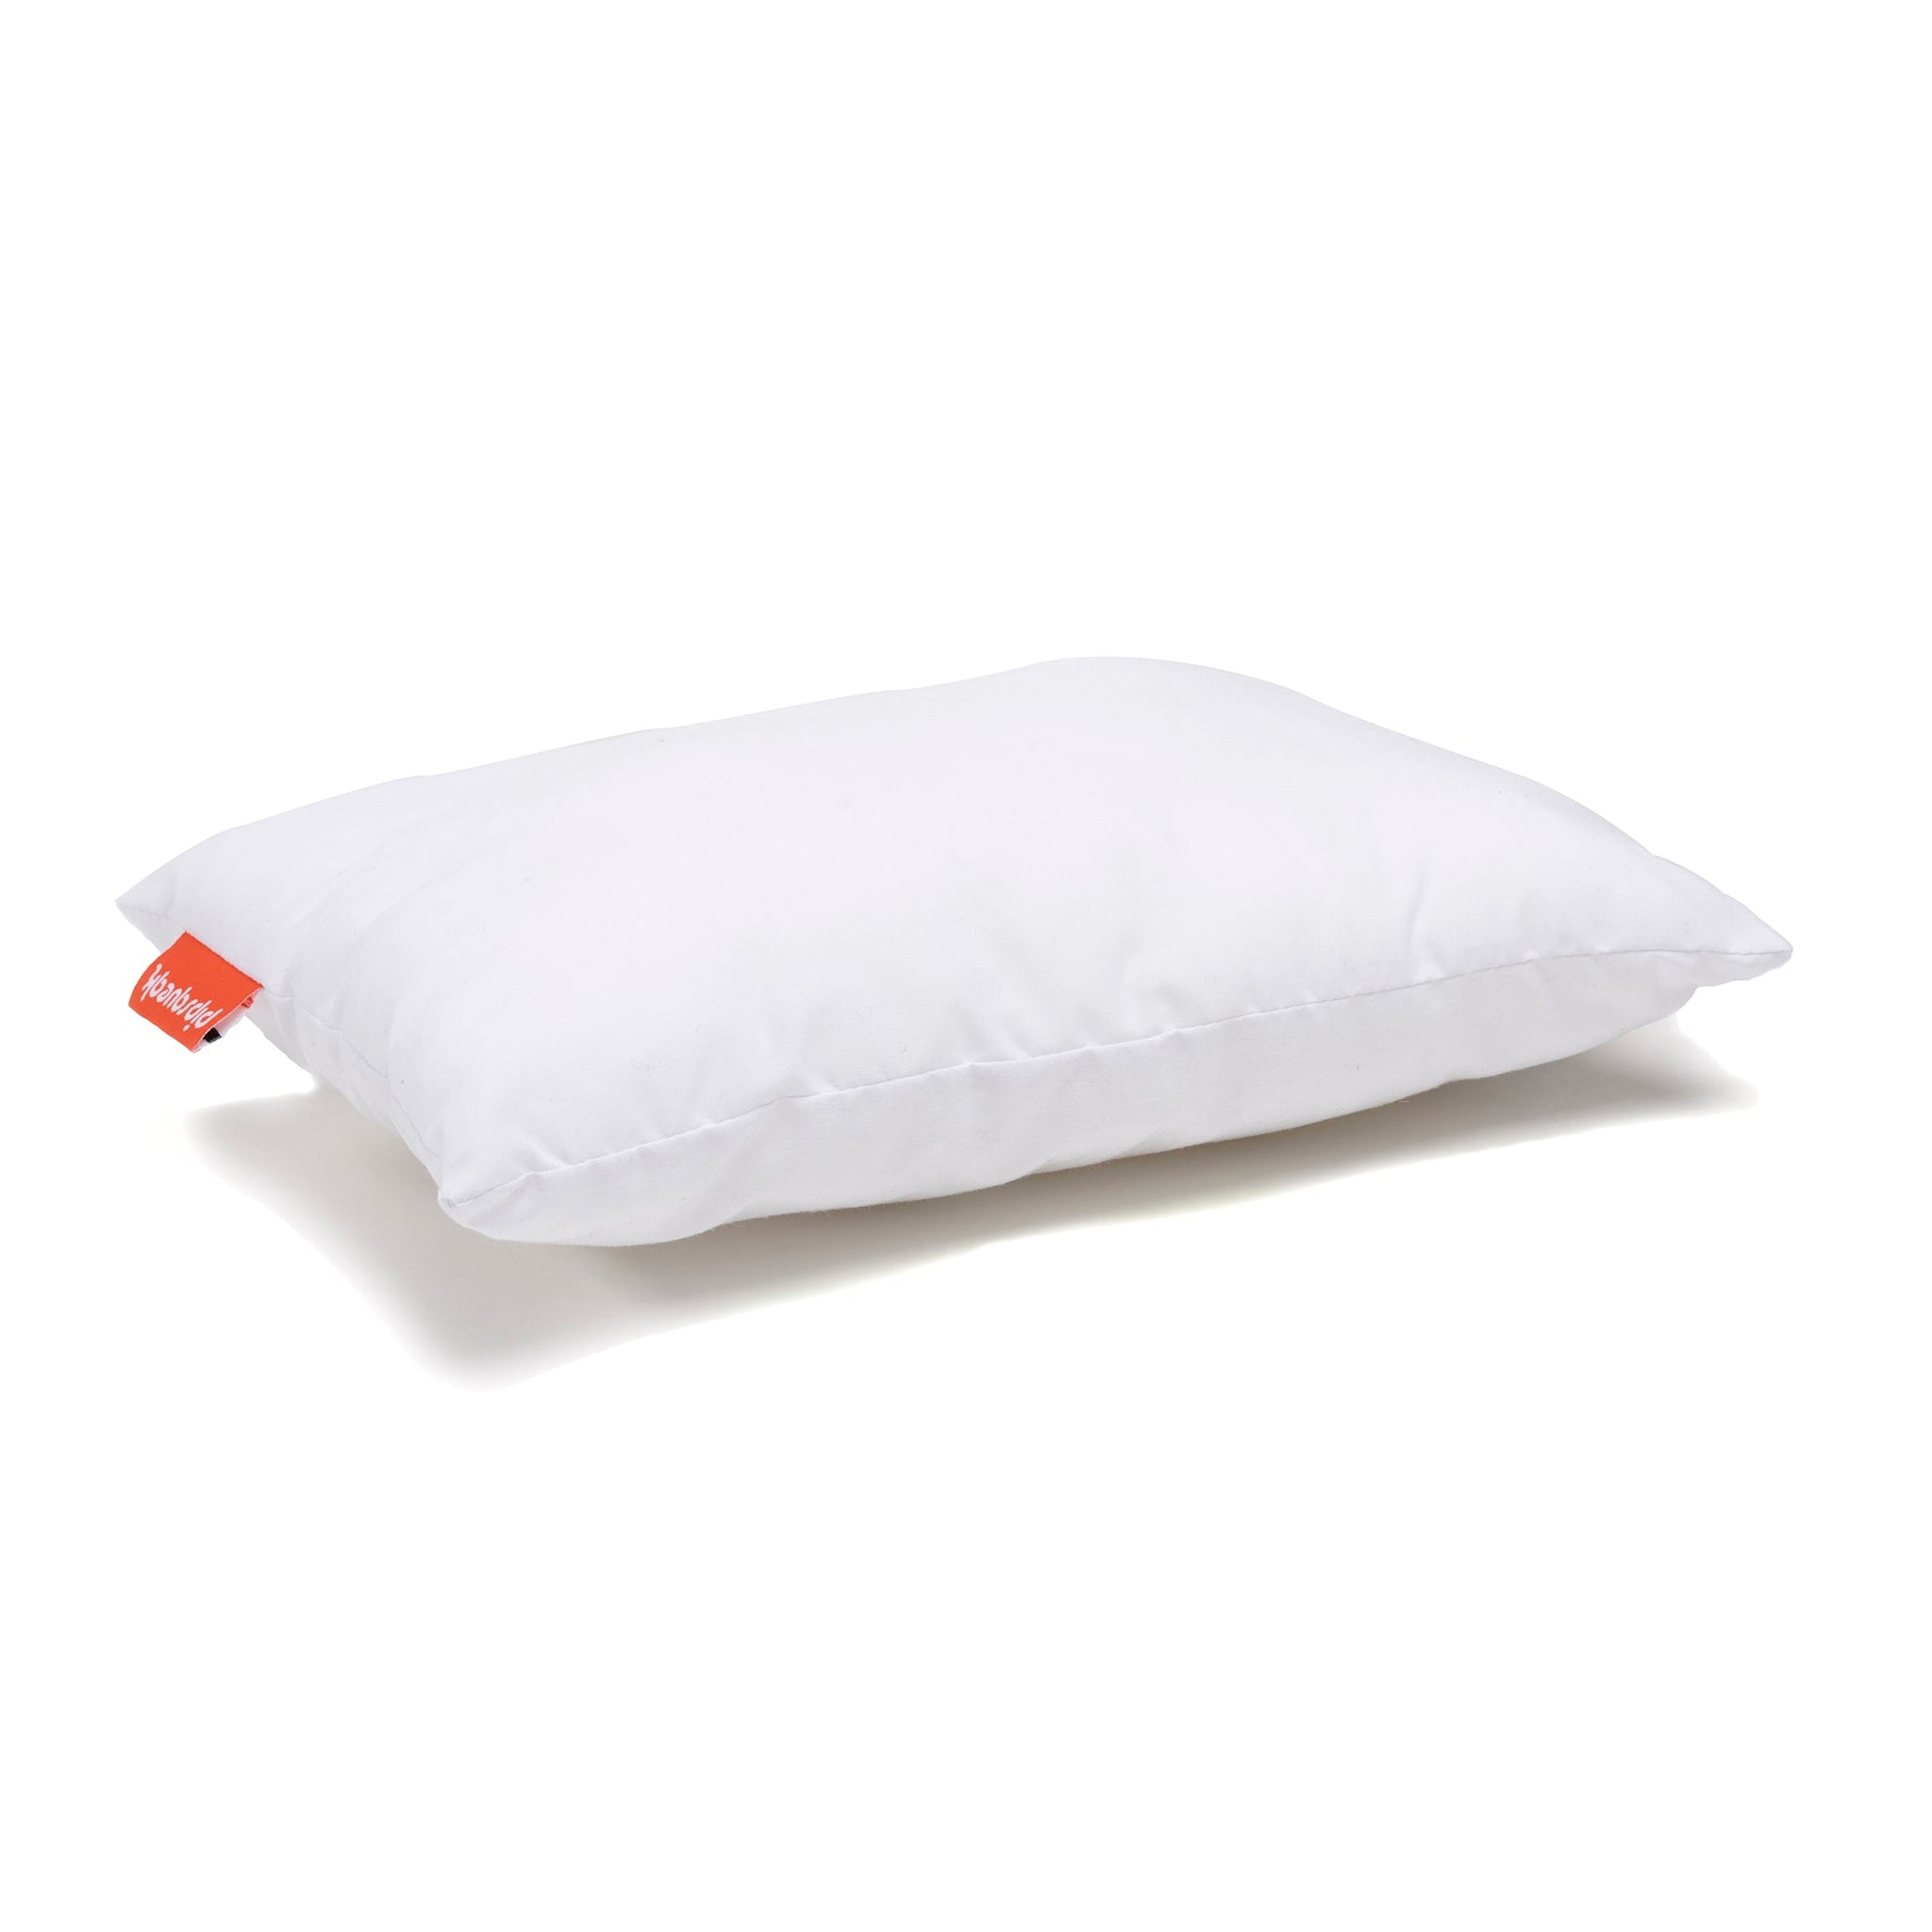 Urban Infant Pipsqueak Small Pillow - Mini 11 x 7 - Tiny Pillow for Travel,  Dogs, Toddlers, Kids, Lumbar, Knees and Neck - White